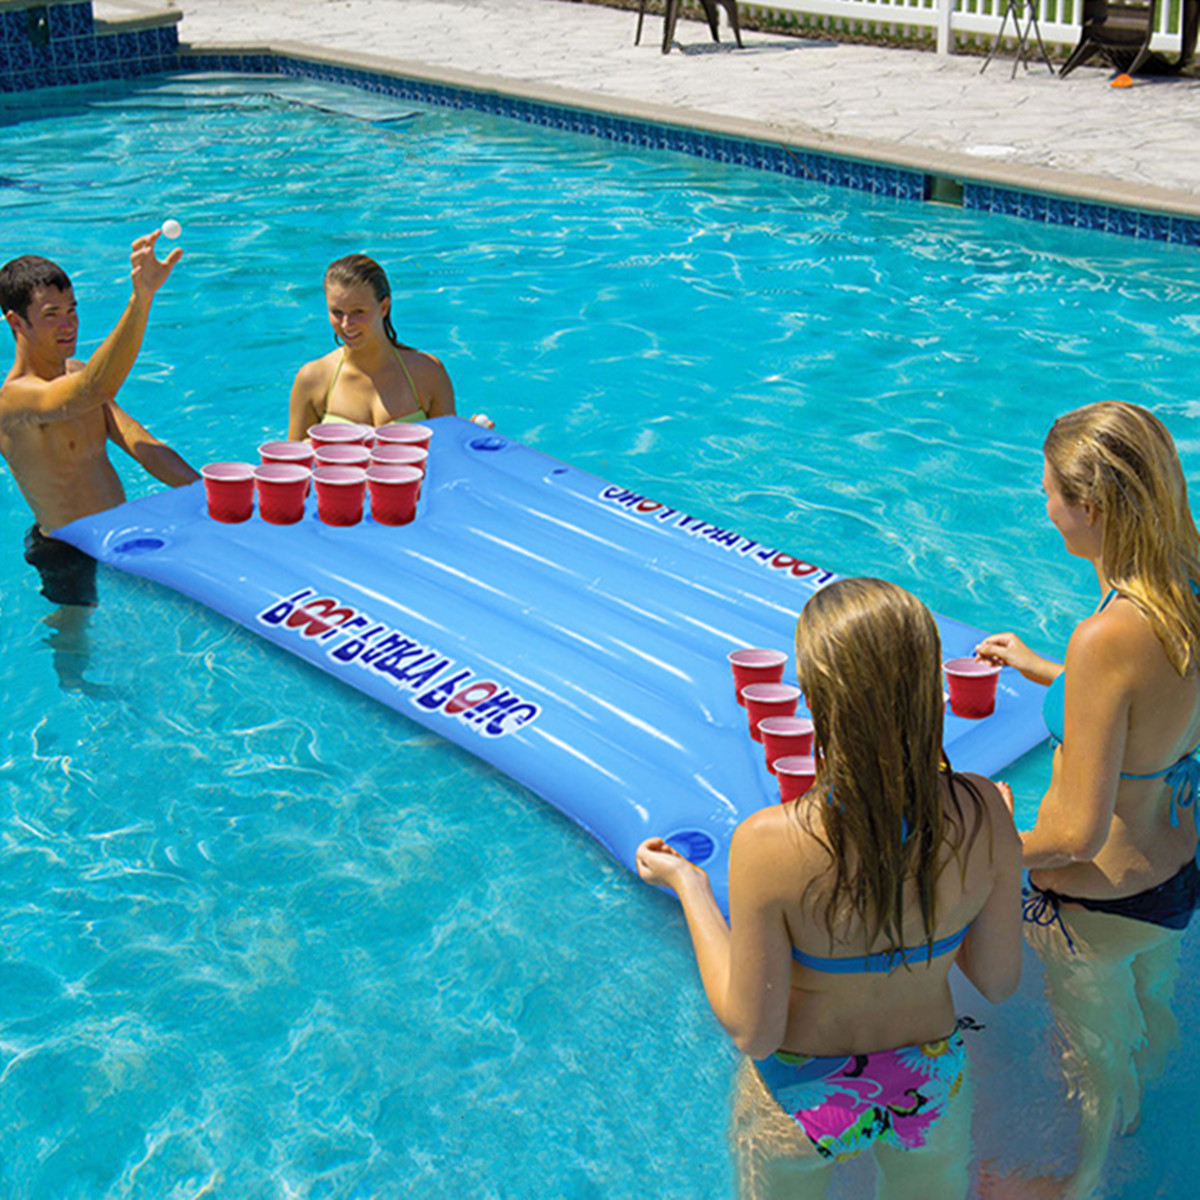 PVC-Inflatable-Beer-Pong-Ball-Table-Water-Floating-Raft-Lounge-Pool-Drinking-Game-24-Cups-Holder-1231572-2